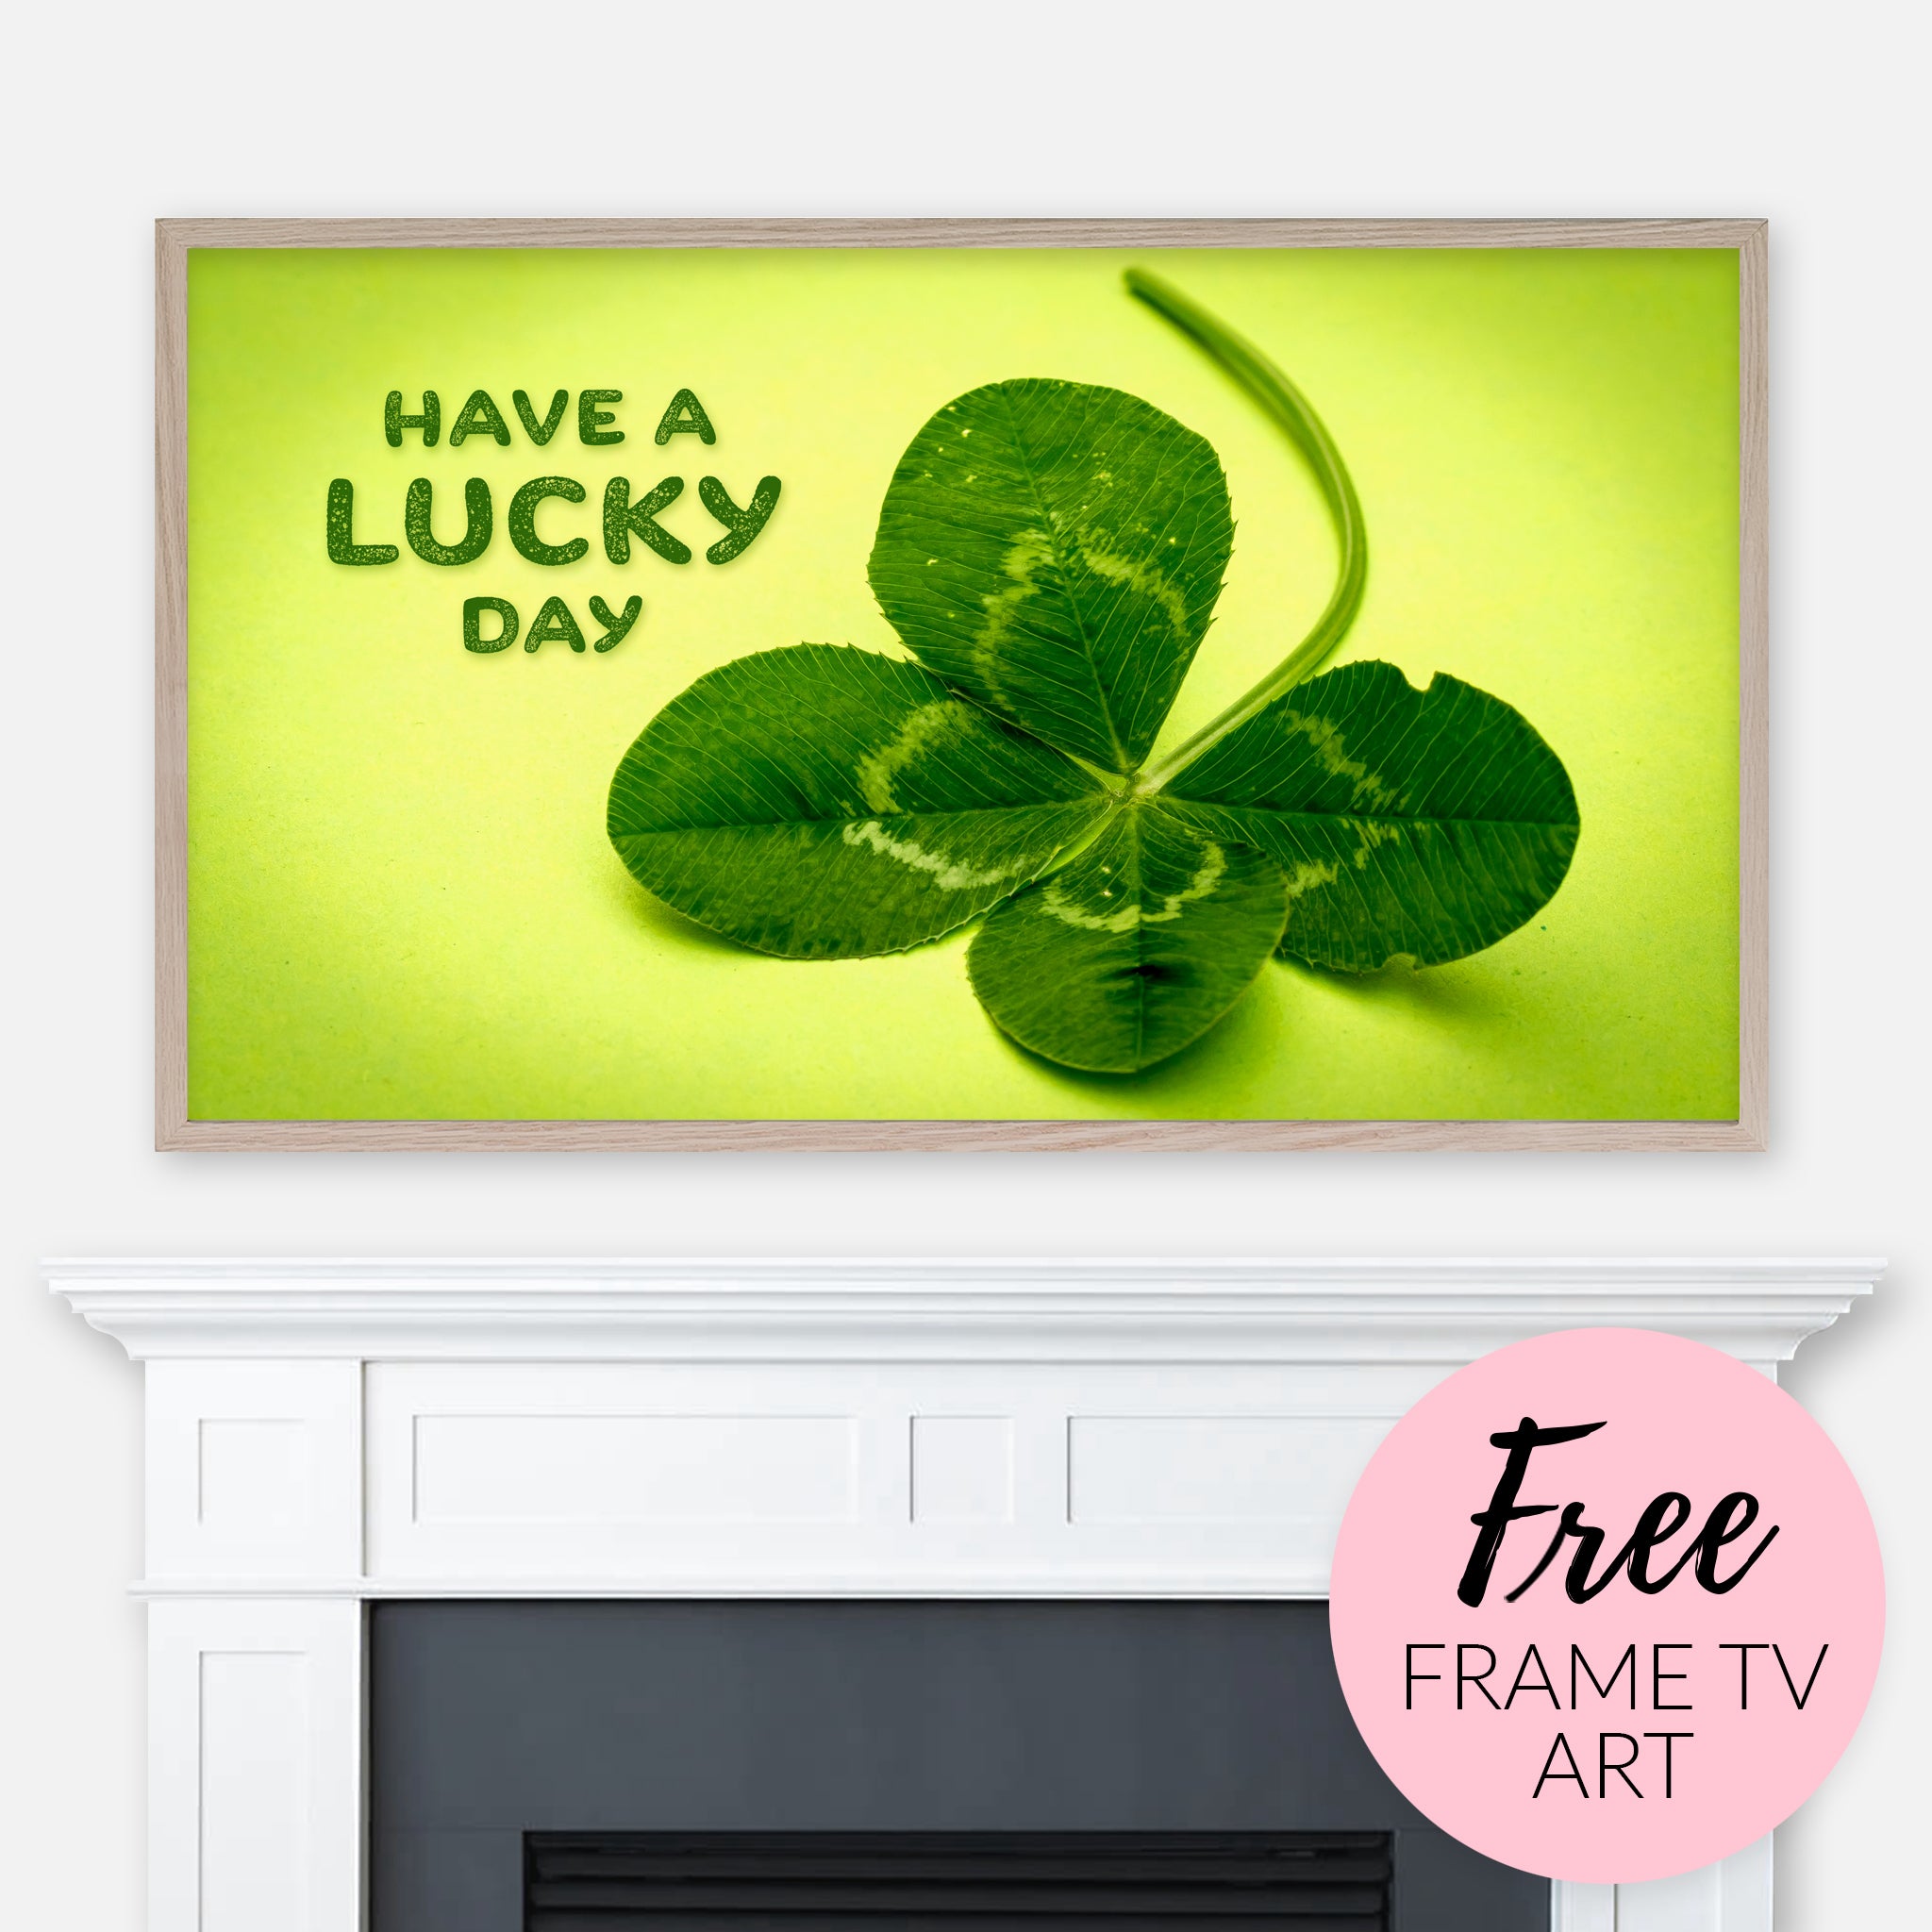 Free Saint Patrick's Day Samsung Frame TV Art Digital Download - Have a Lucky Day - Four-Leaf Clover